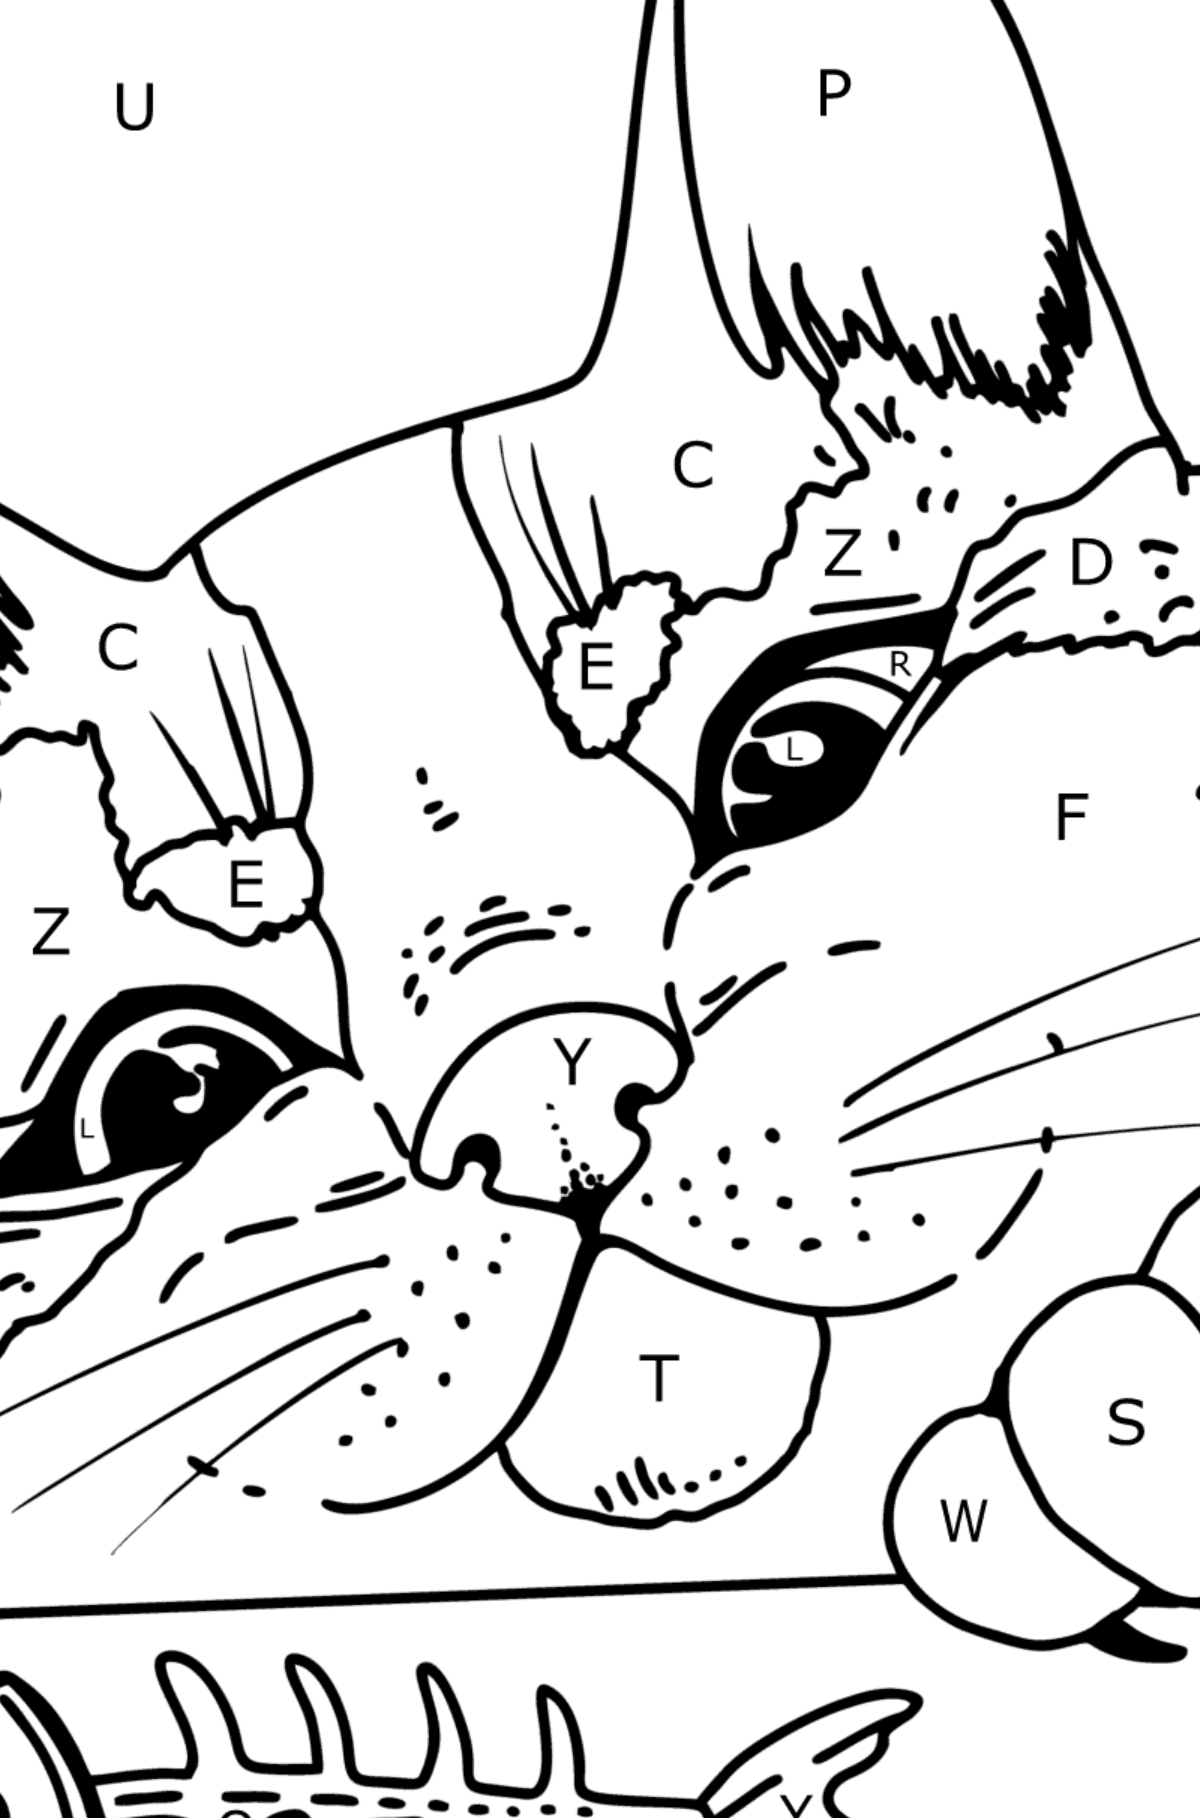 Cat Head coloring page - Coloring by Letters for Kids